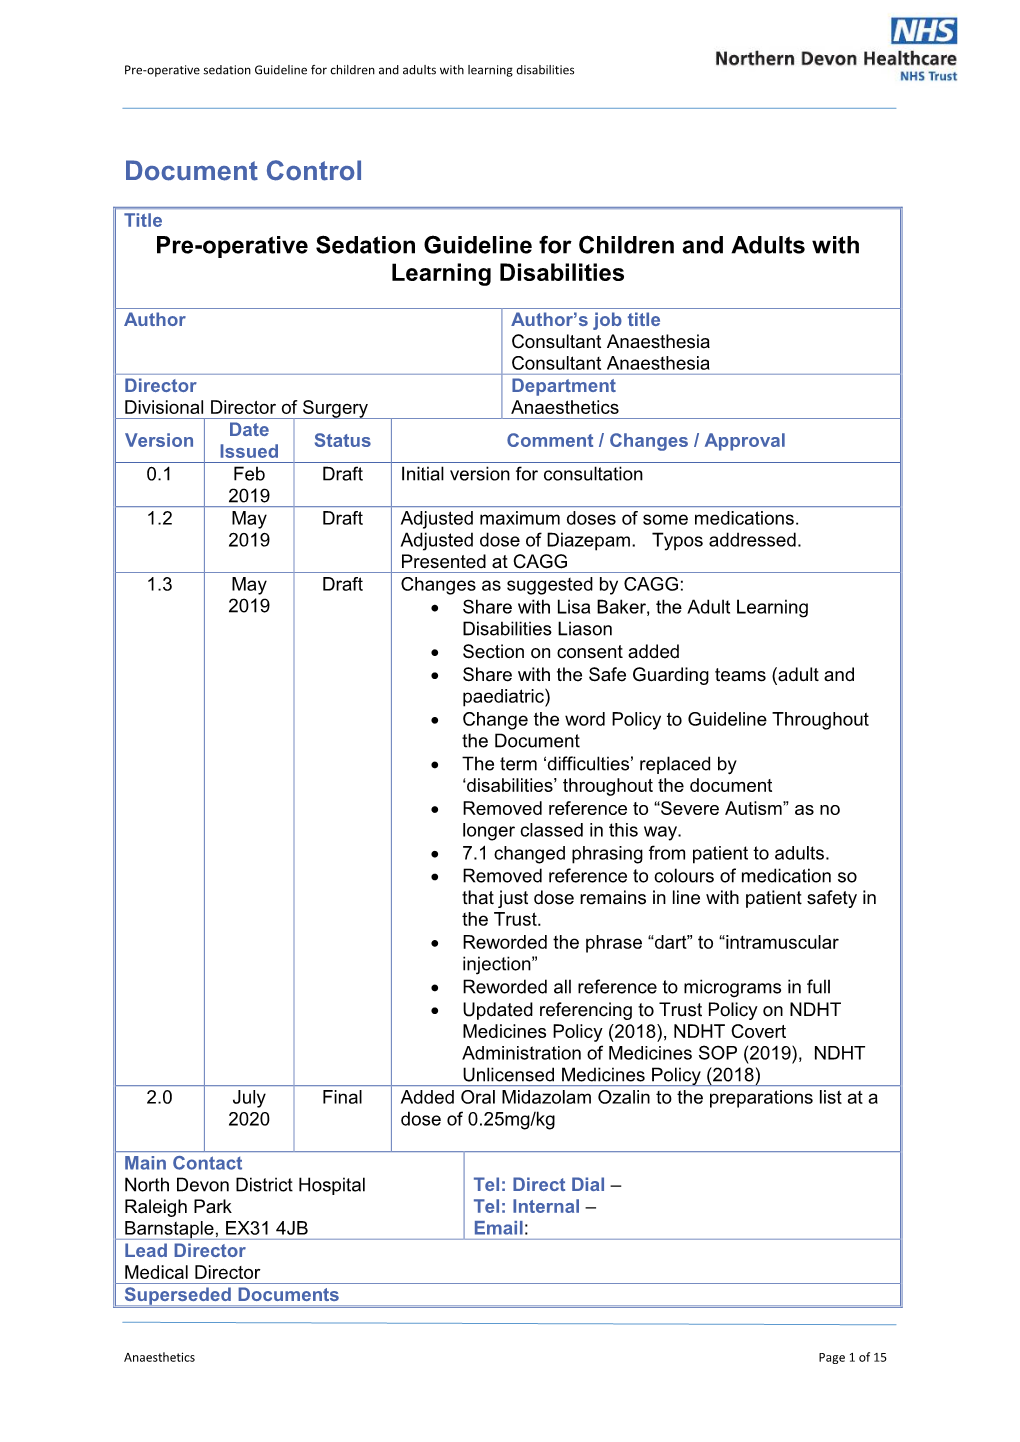 Pre-Operative Sedation Guideline for Children and Adults with Learning Disabilities